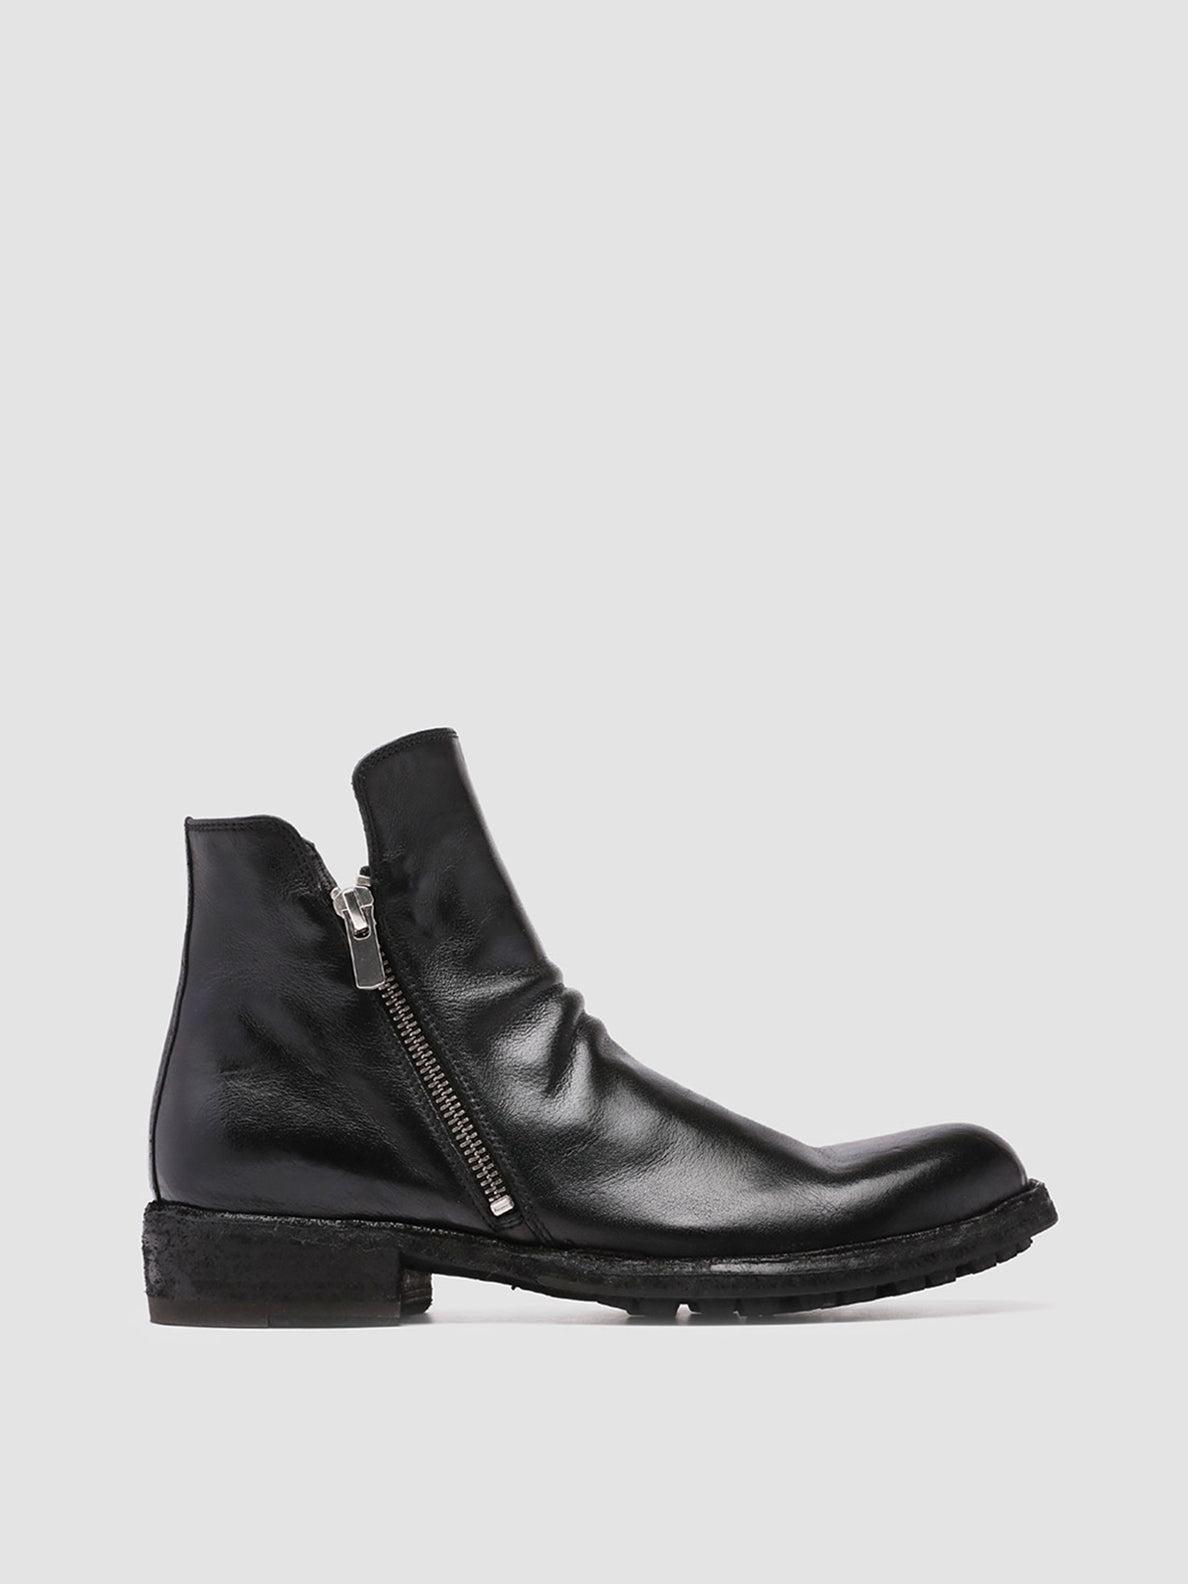 Officine Creative Legrand 200 Nero - Zipped Leather Booties in Black | Lyst